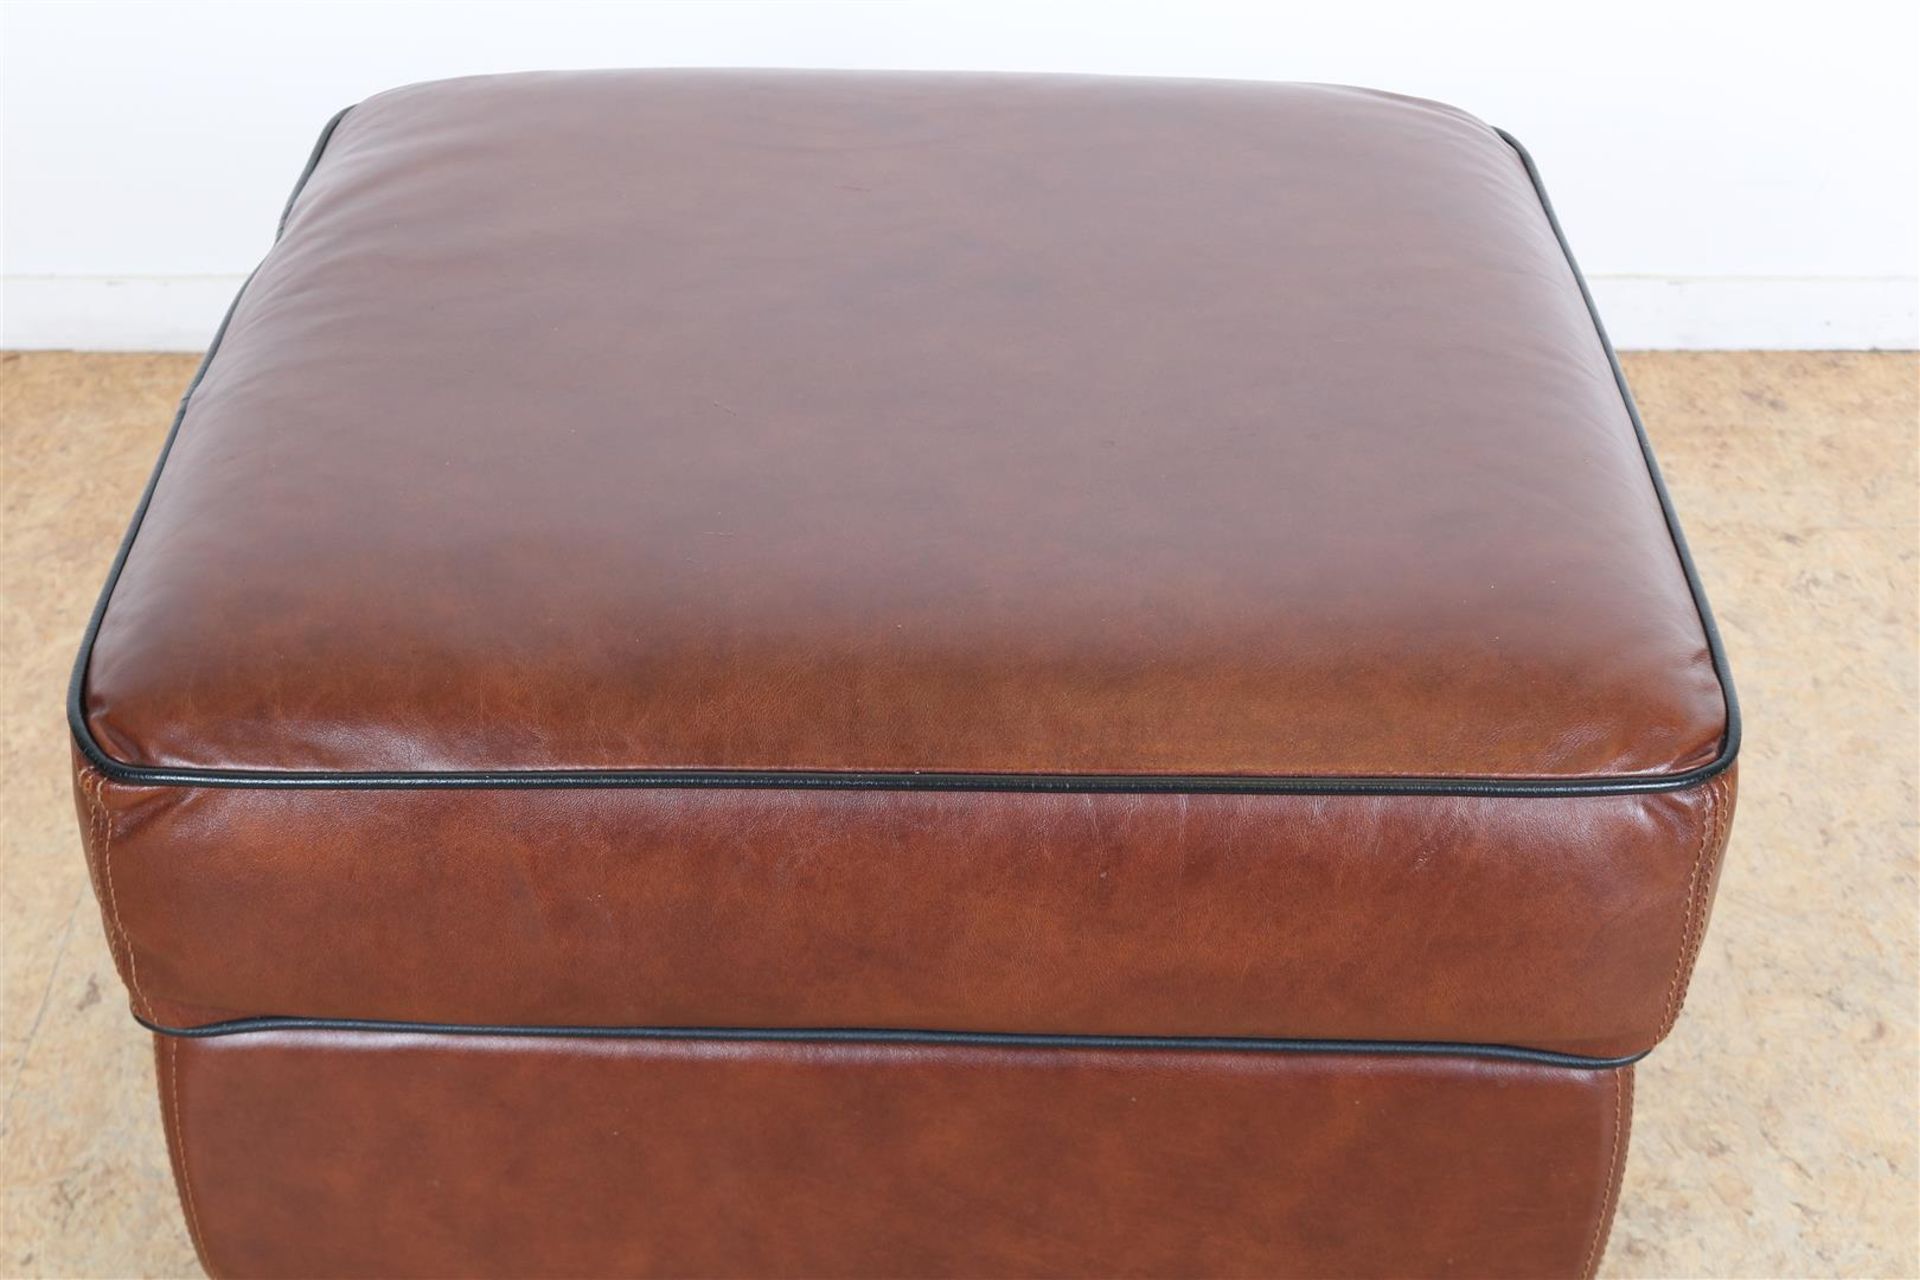 Sheep leather footstool/hooker with black piping on wooden legs, 43 x 62 x 62 cm. - Image 2 of 4